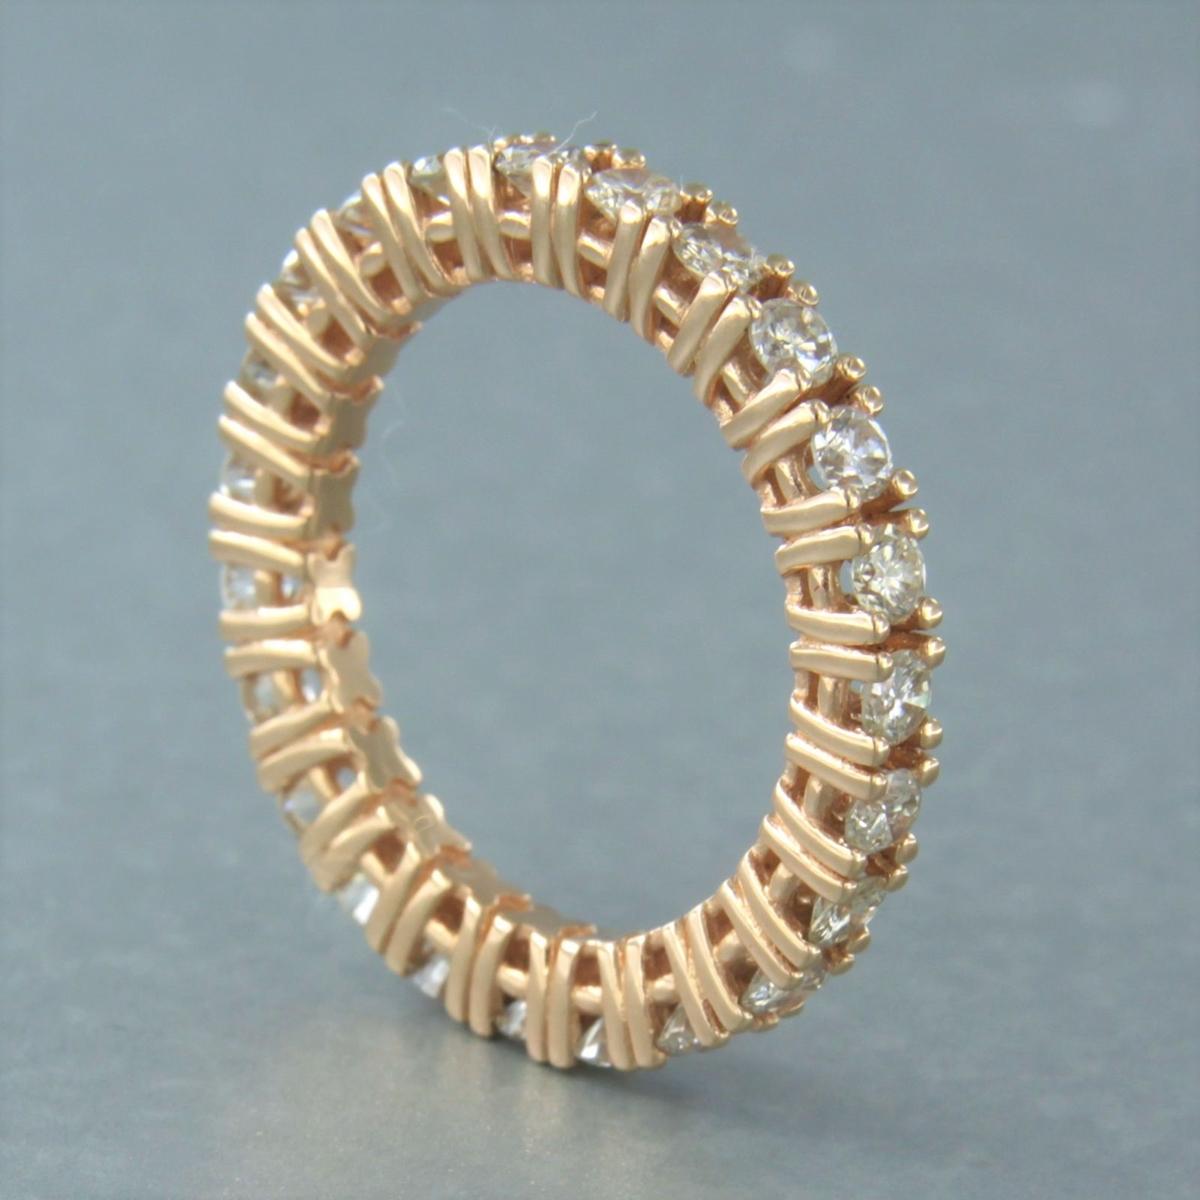 18k rose gold entire alliance set with brilliant cut diamonds up to . 1.55ct - I/J - SI/I - ring size U.S. 7.25 - EU. 17.5 (55)

detailed description:

The ring is 2.8 mm wide and 3.6 mm high.

Ring size 17.5 (55)

Weight 4.5 grams

Occupied with

-